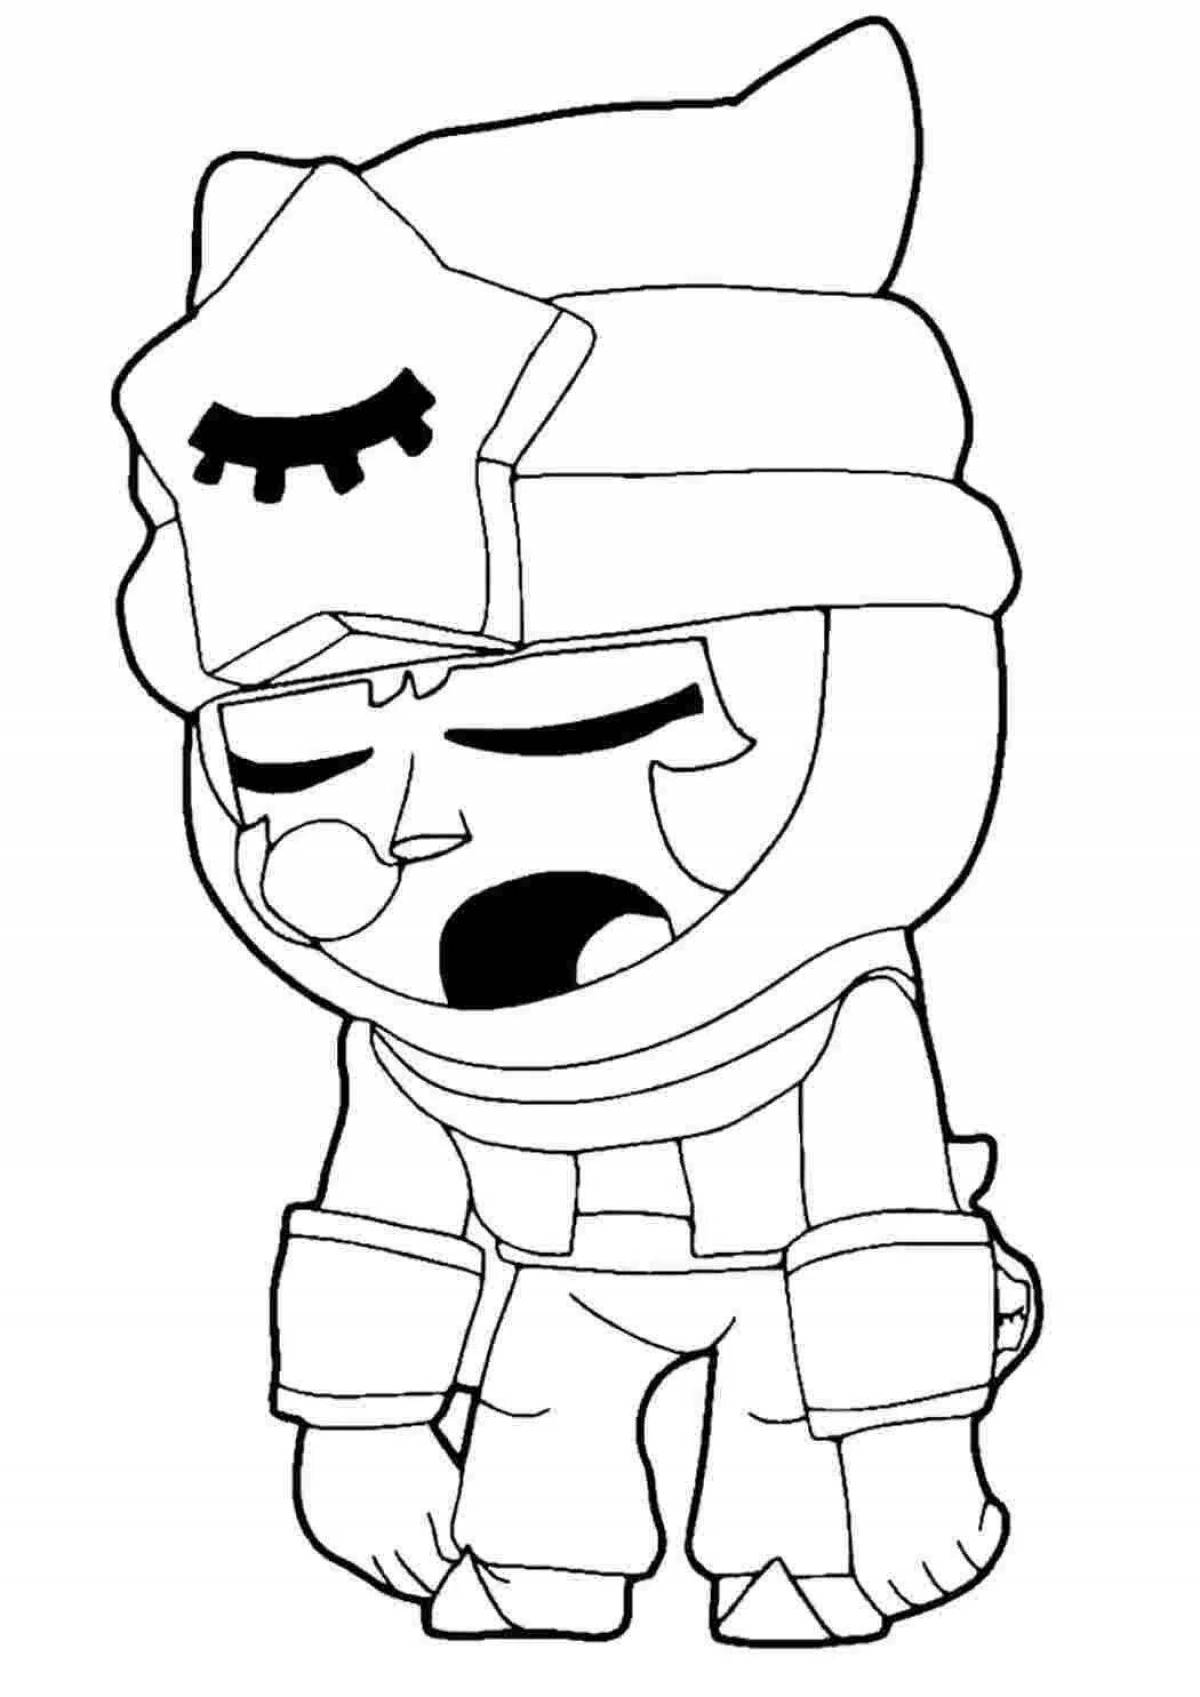 Cute dynamike coloring page